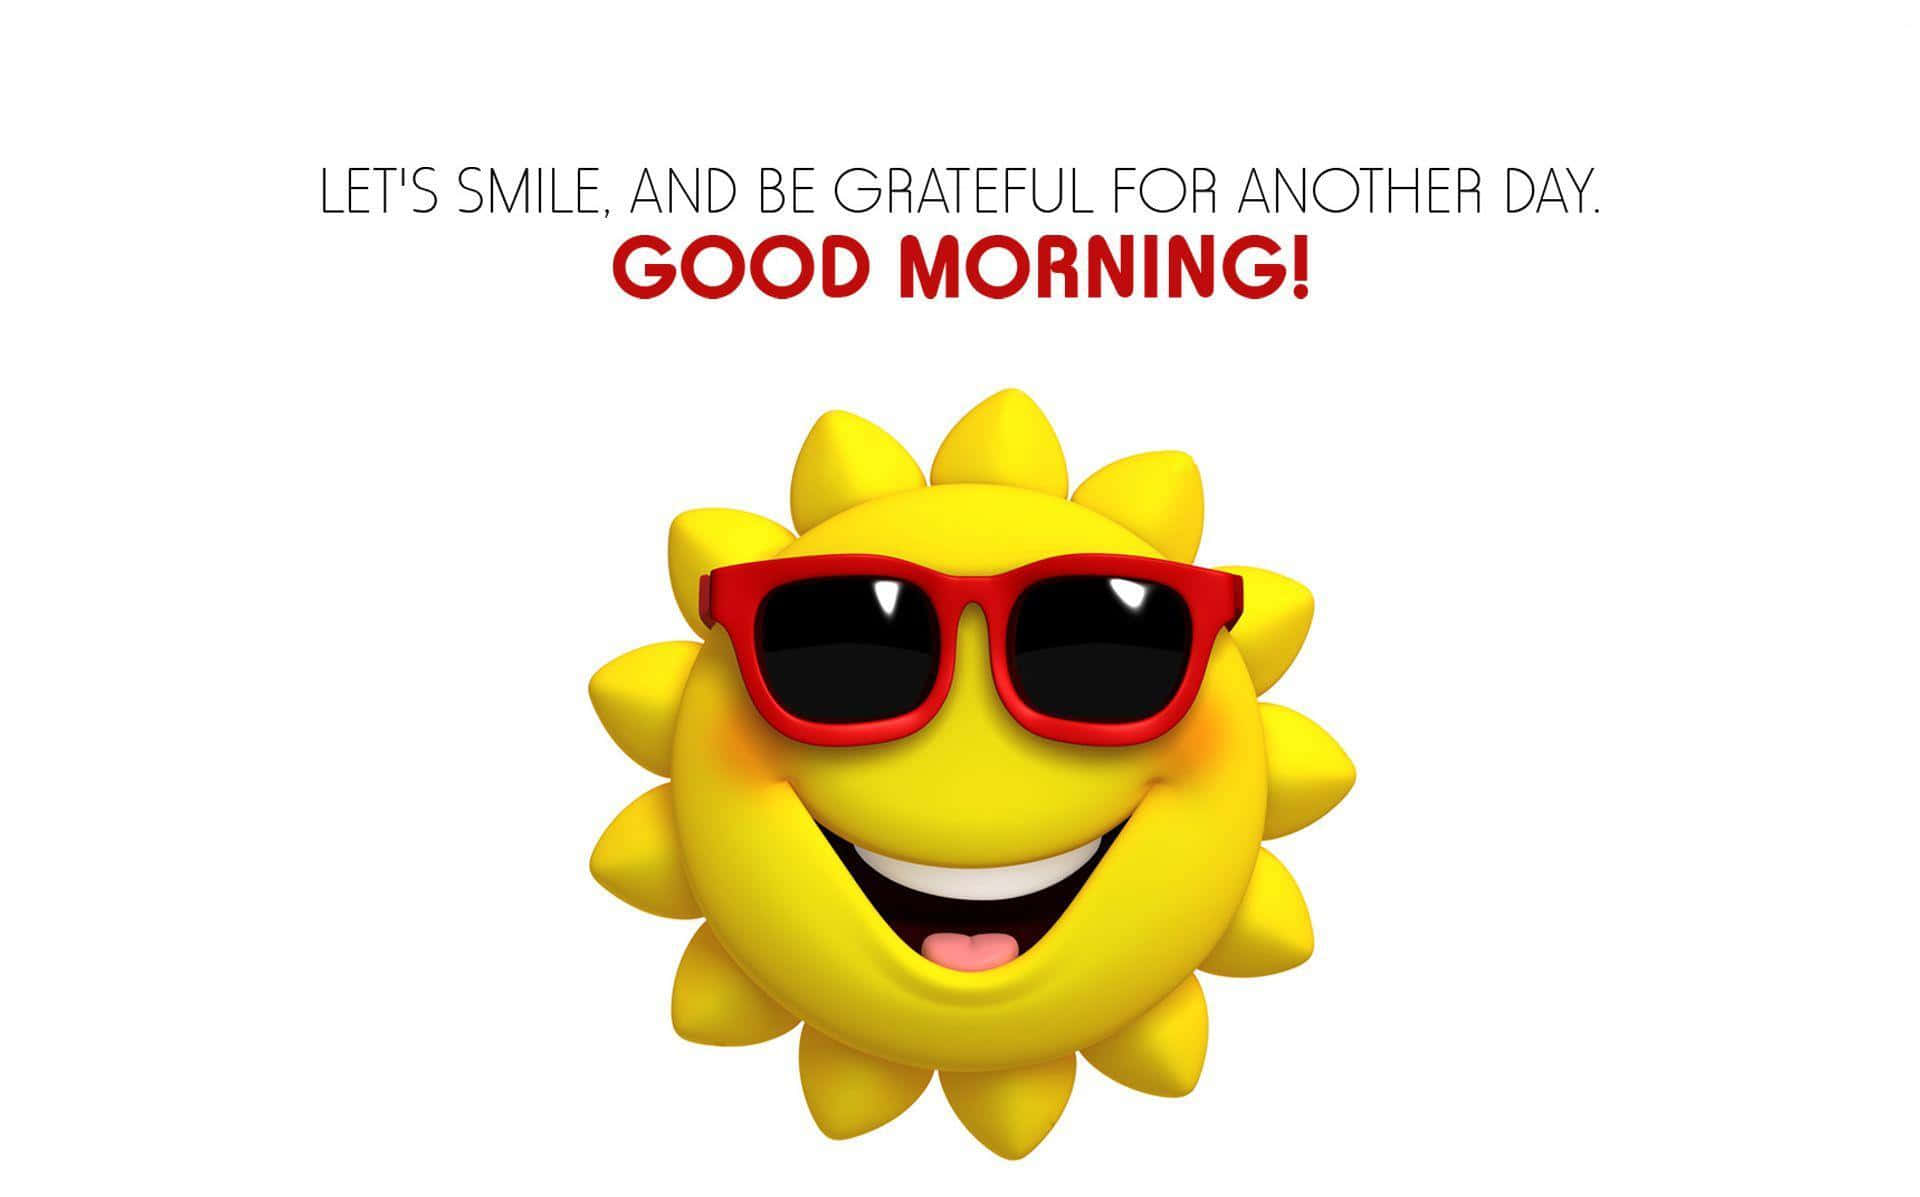 Start your morning with a positive attitude